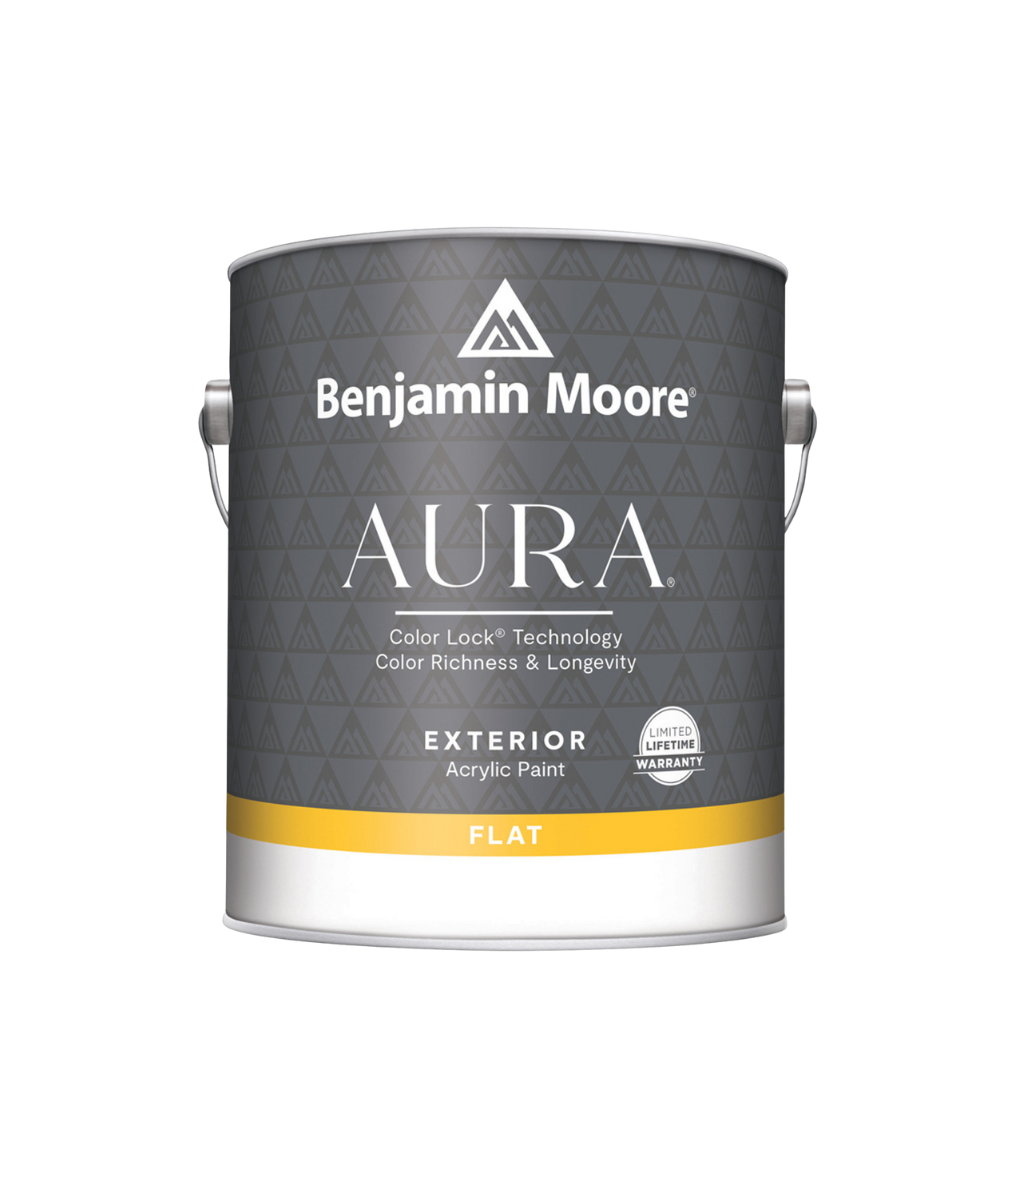 Benjamin Moore Aura Exterior Flat Paint available at JC Licht.